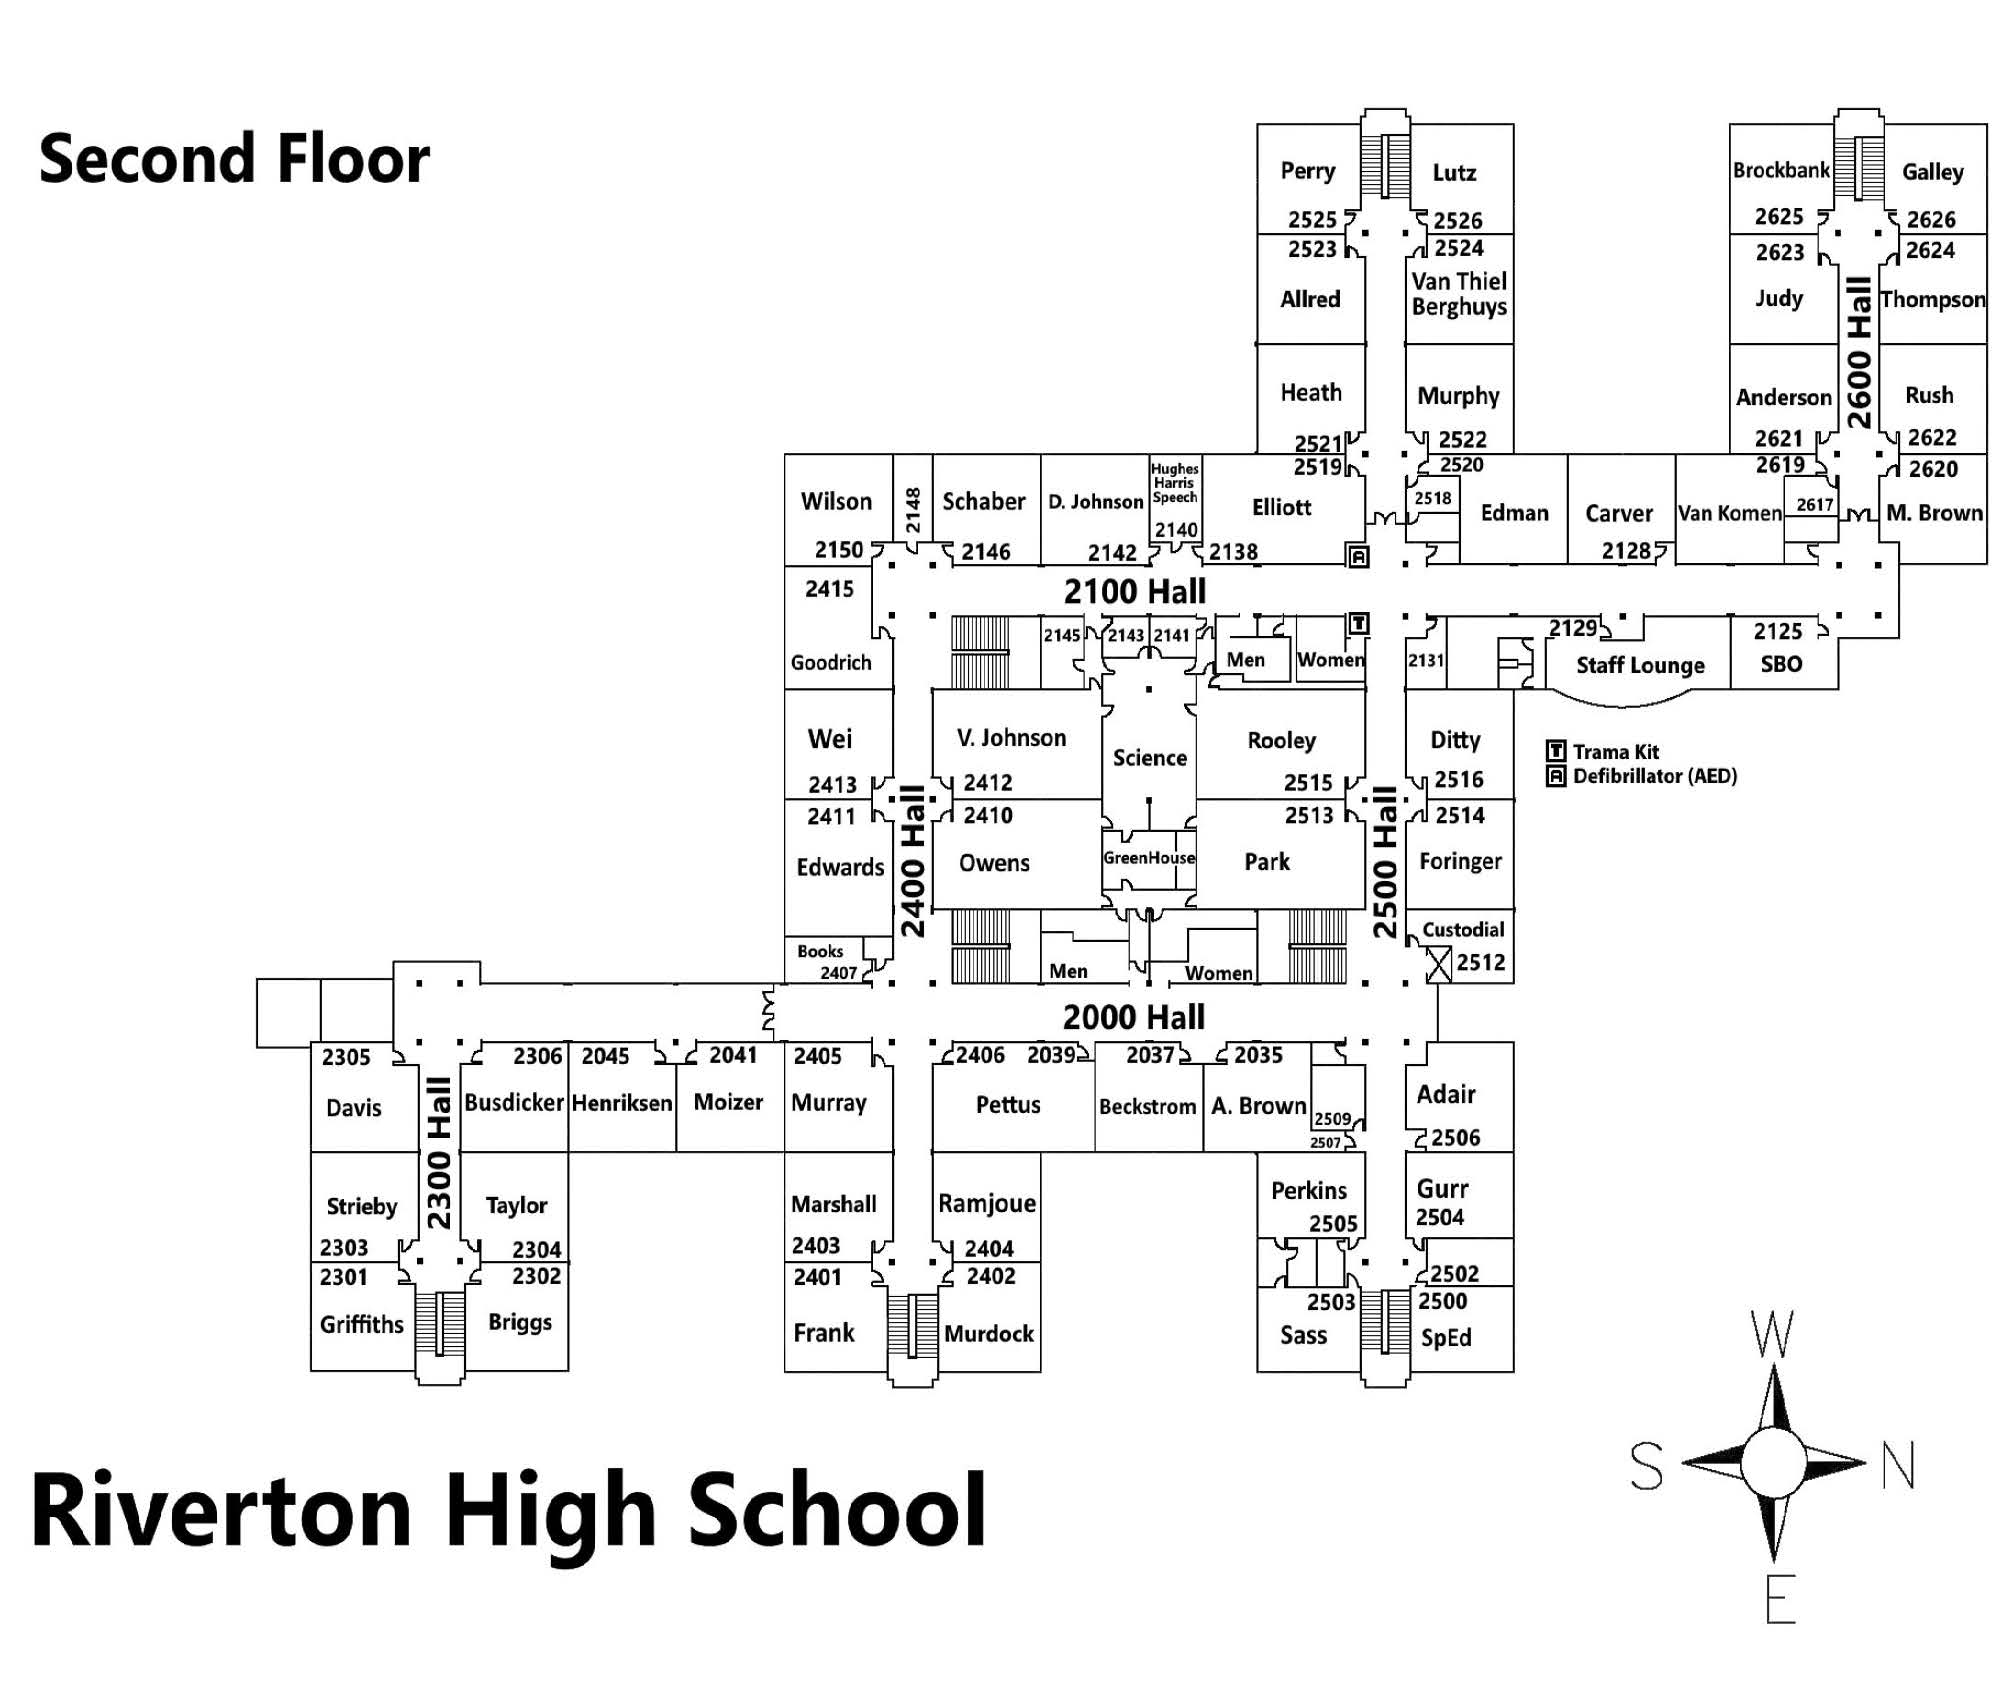 Picture of a Map -- Upper floor of RHS